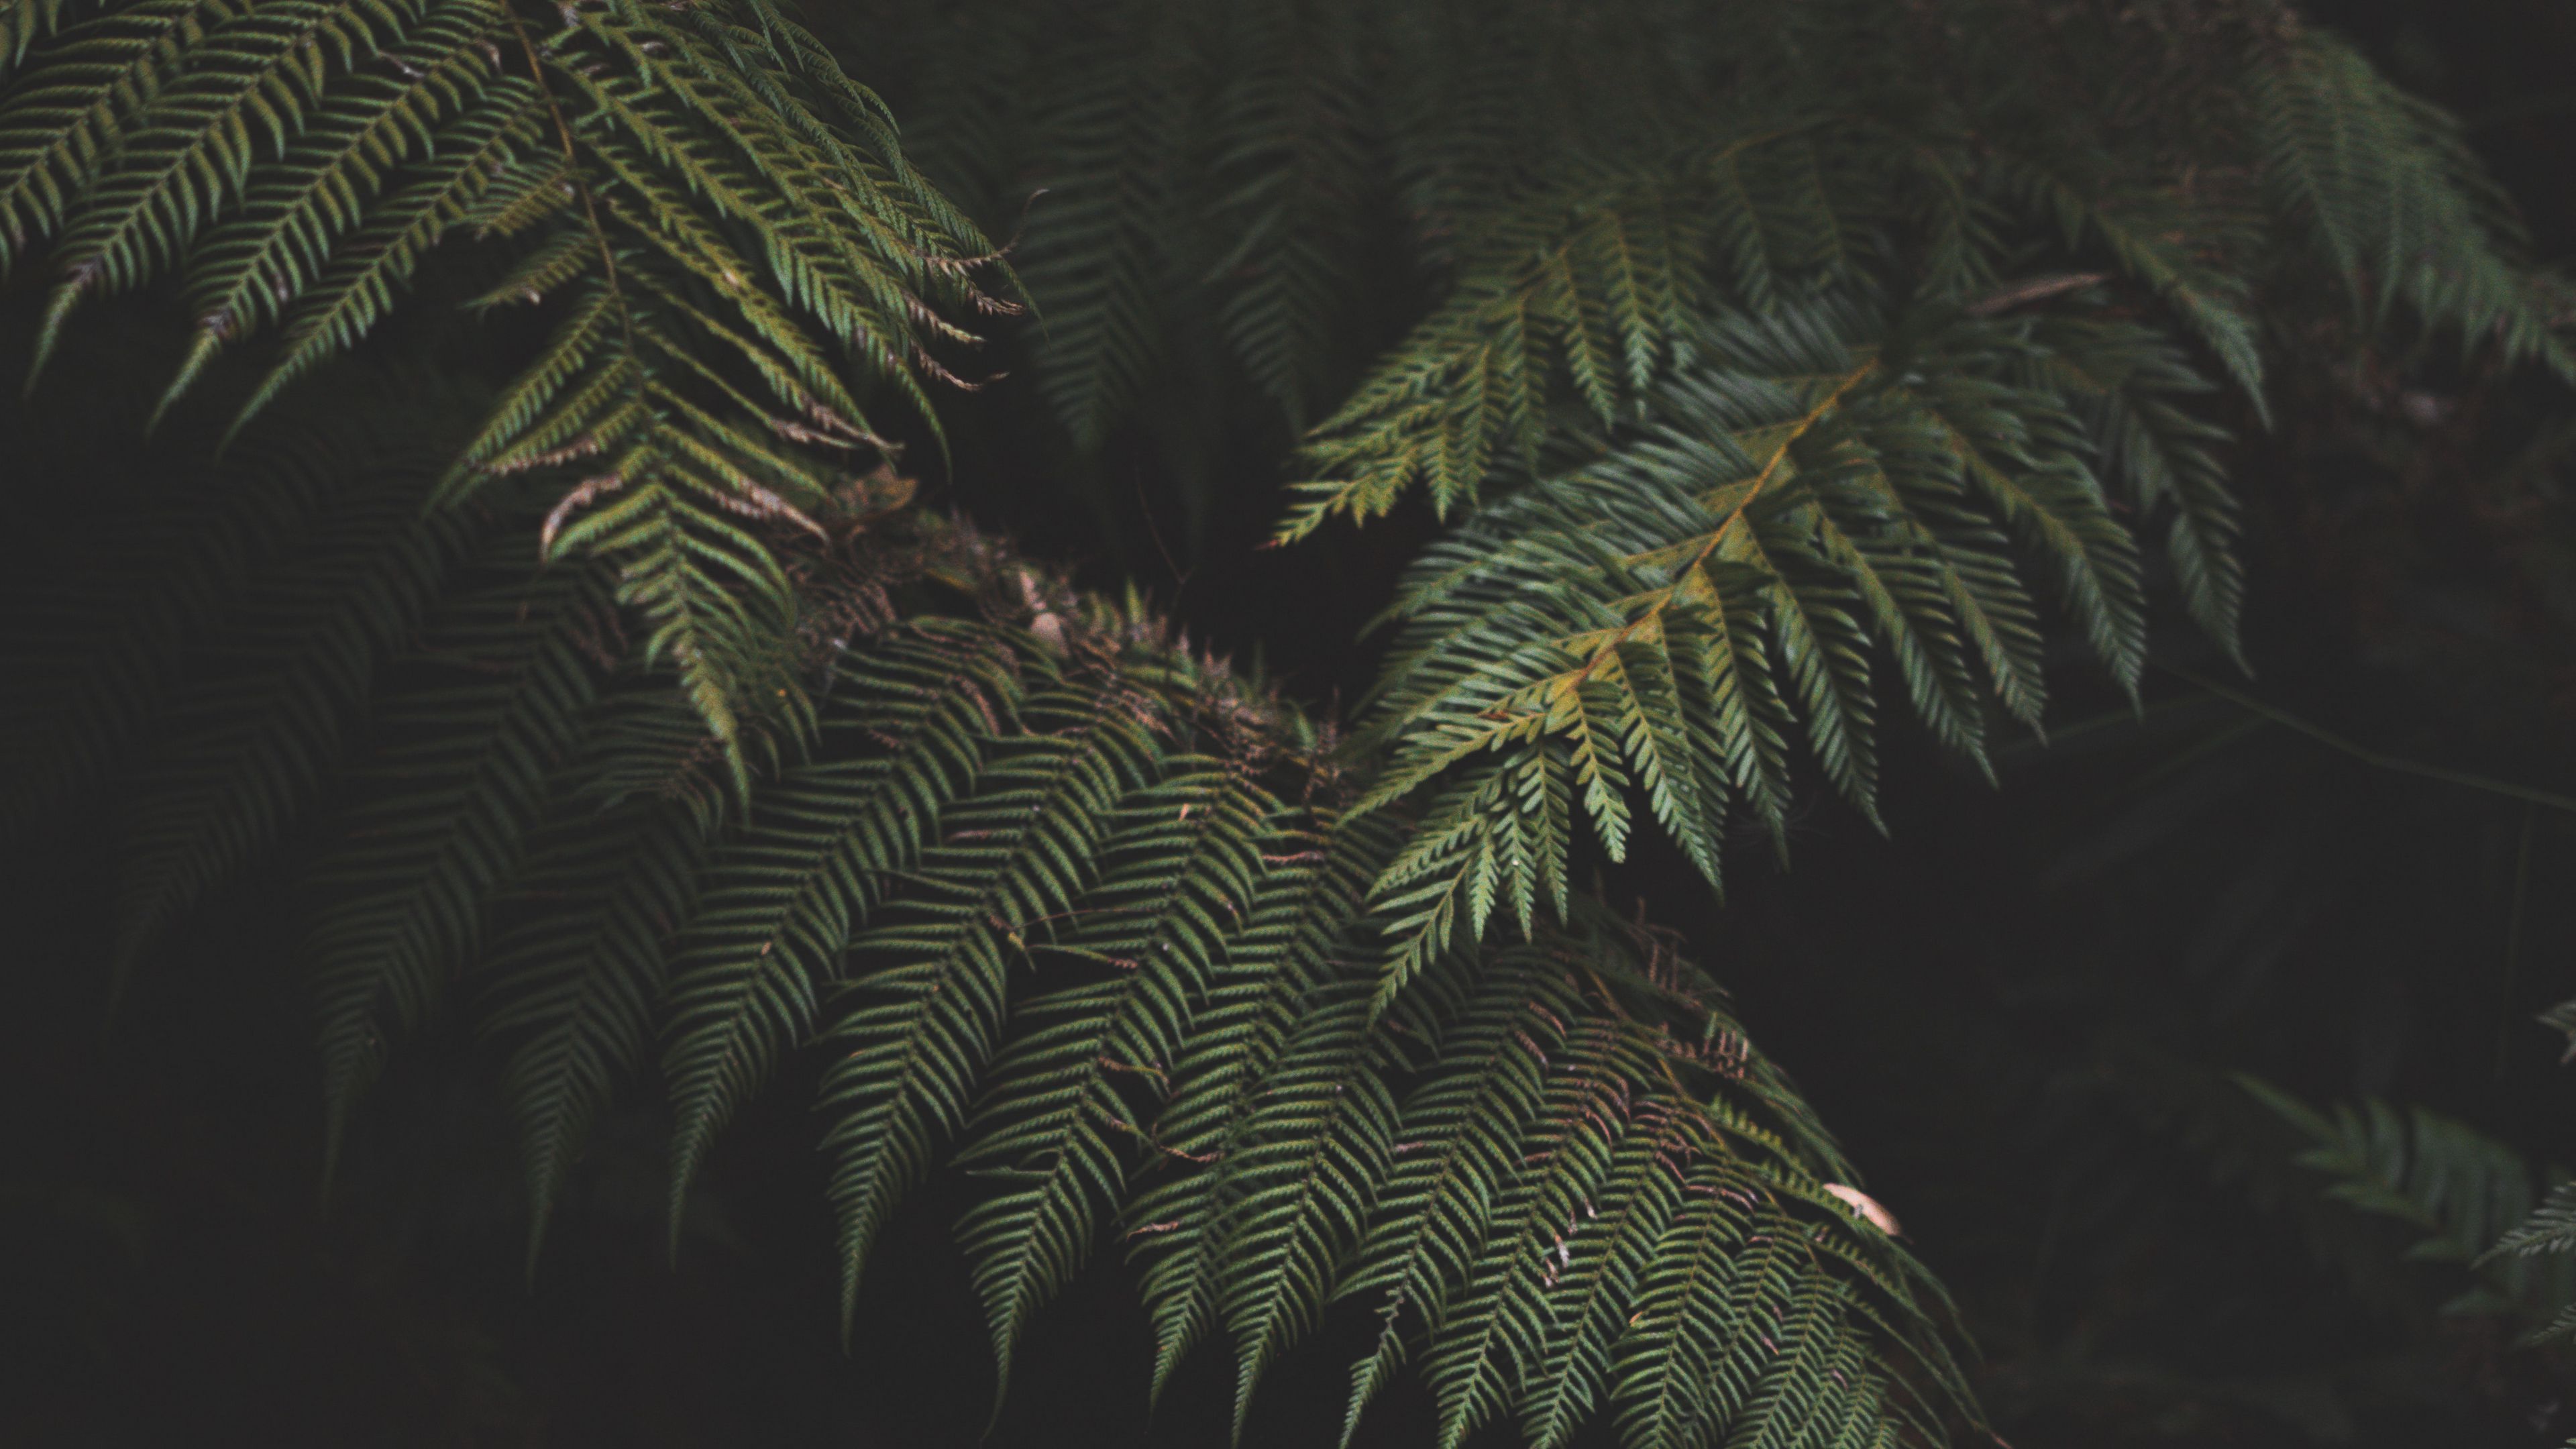 Download wallpaper 3840x2160 fern, leaves, plant, green, nature 4k uhd 16:9  hd background